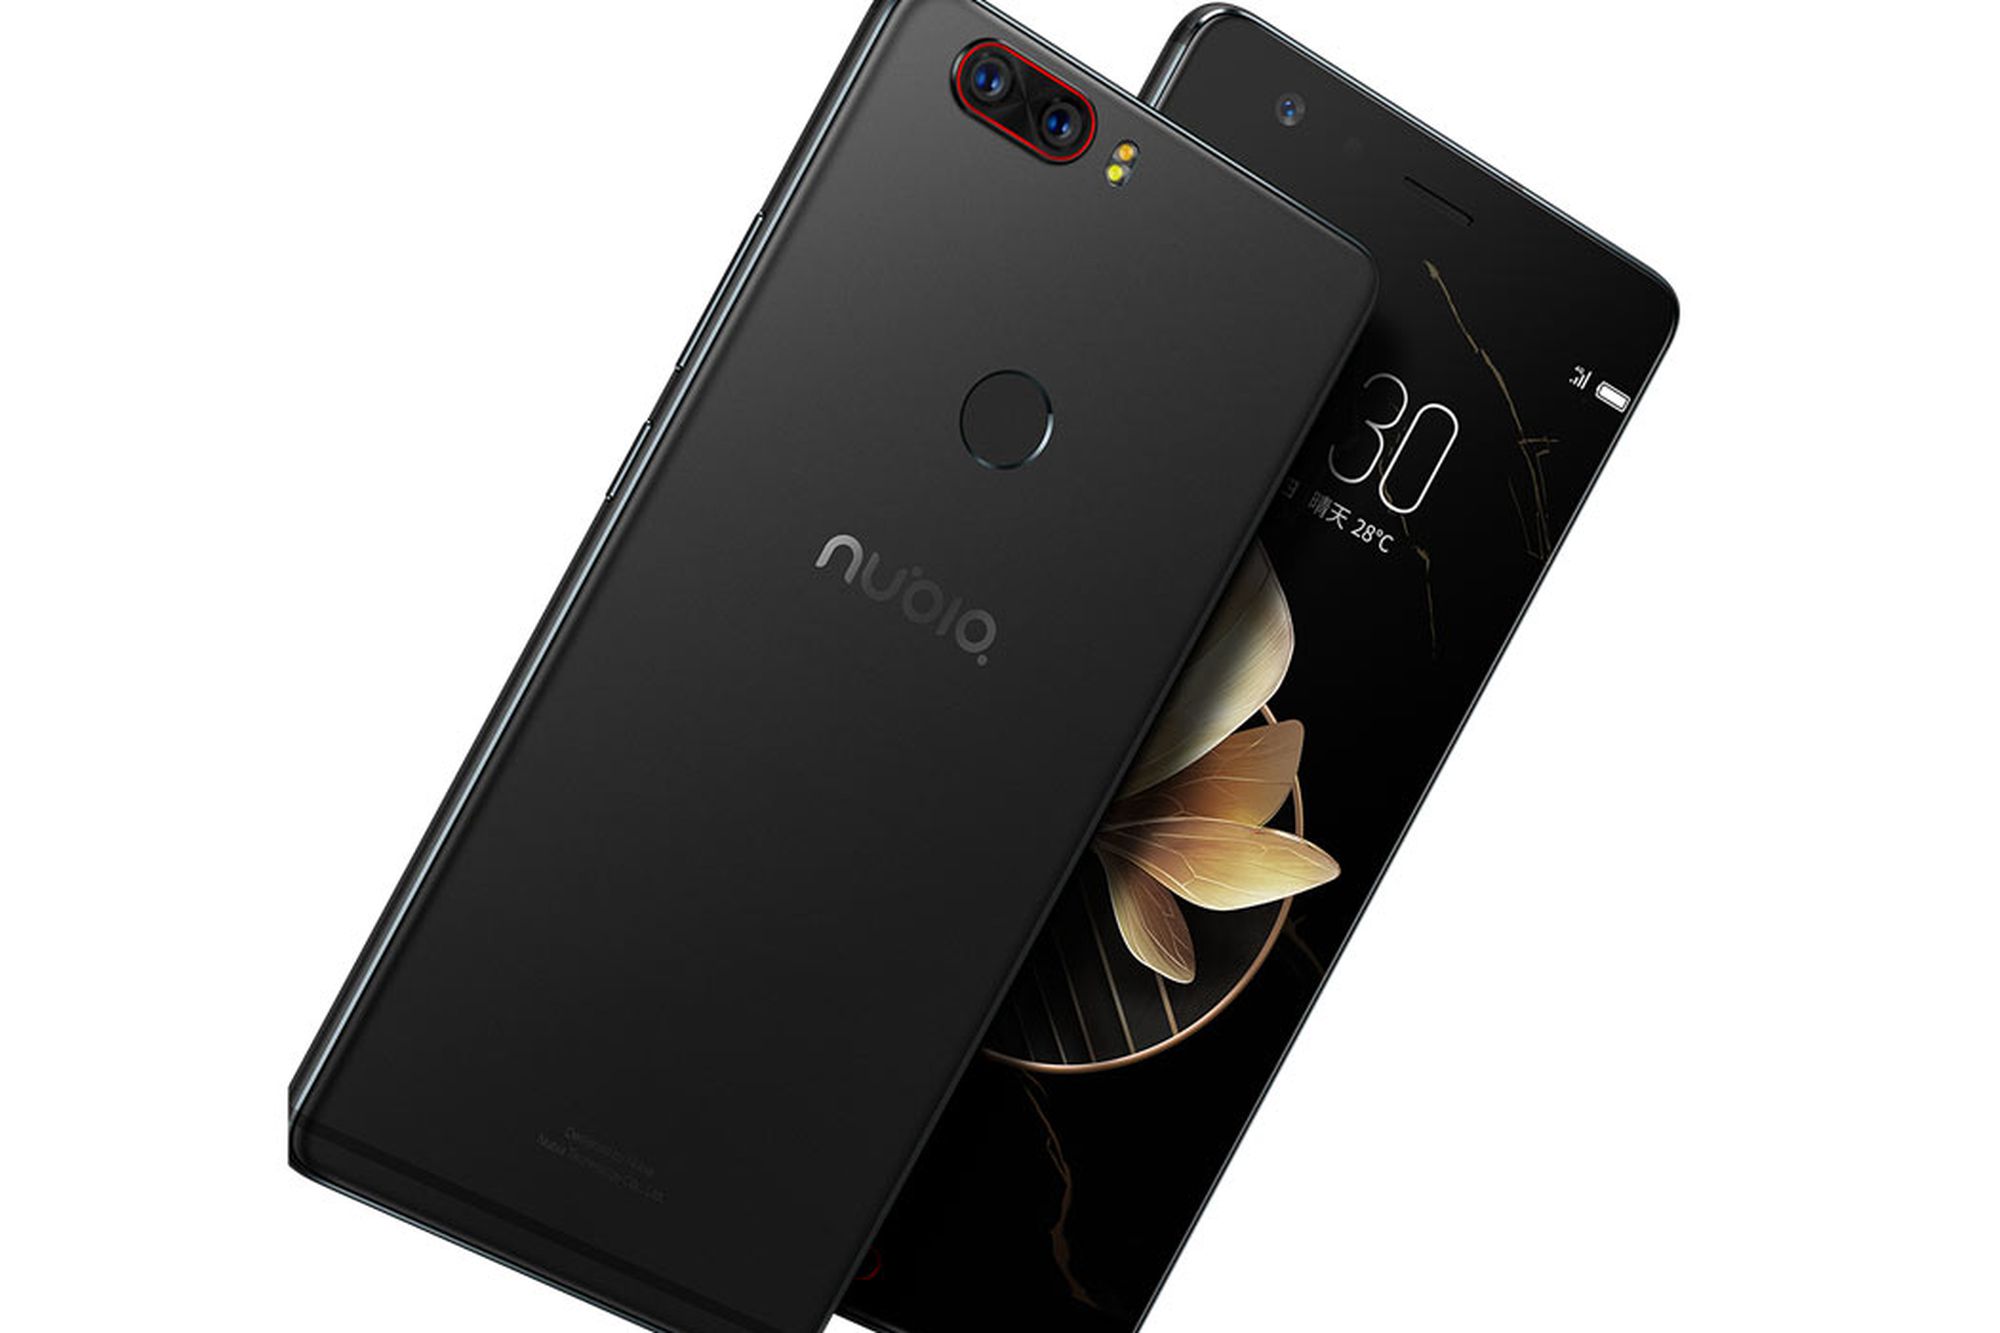 The ZTE Nubia Z17 is the first phone that supports Quick Charge 4+ 